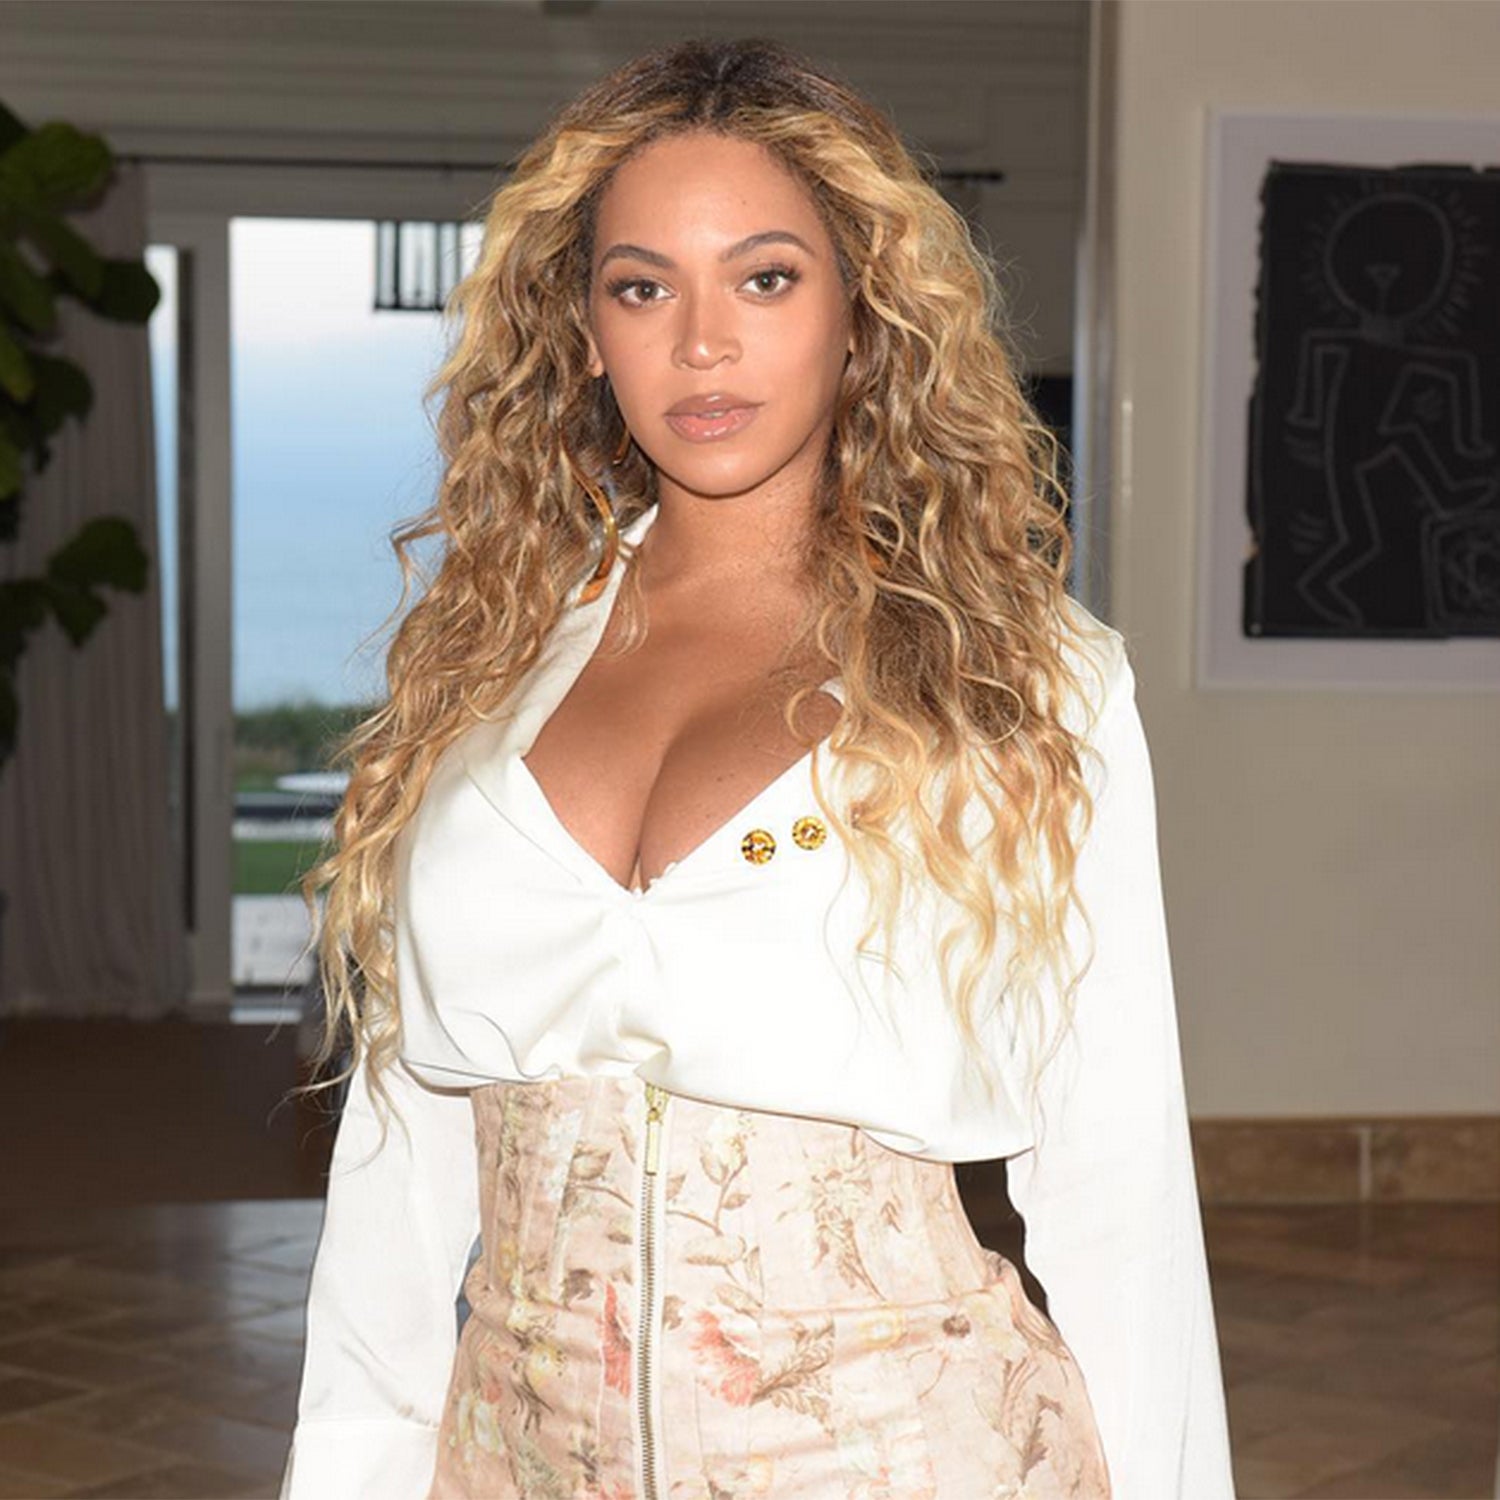 Beyoncé Hasn't Started to Work Out Yet After Giving Birth to Twins: Source
